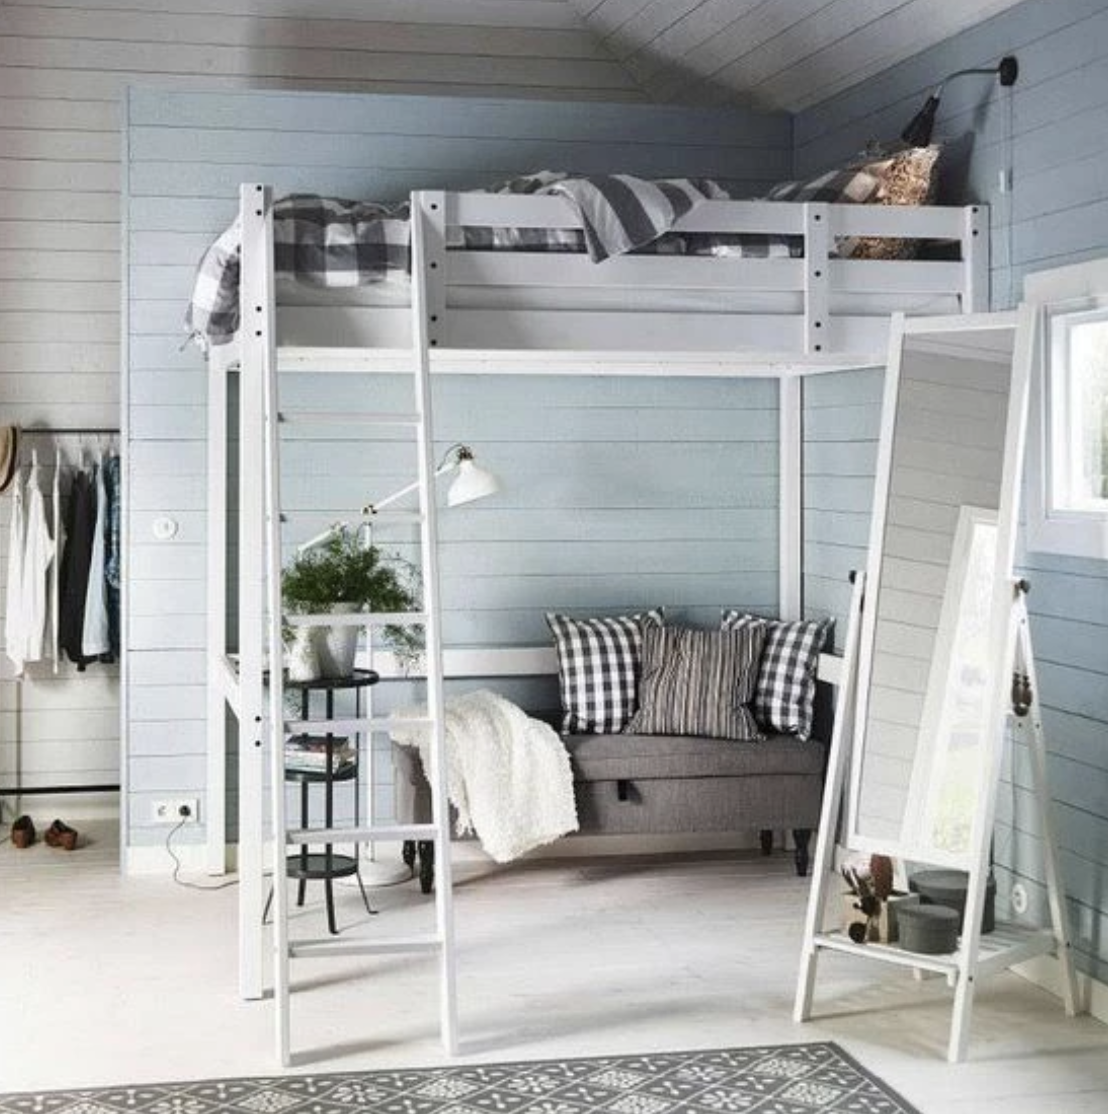 10 Awesome Loft Bed Ideas from Pinterest - AdultBunkBeds.com